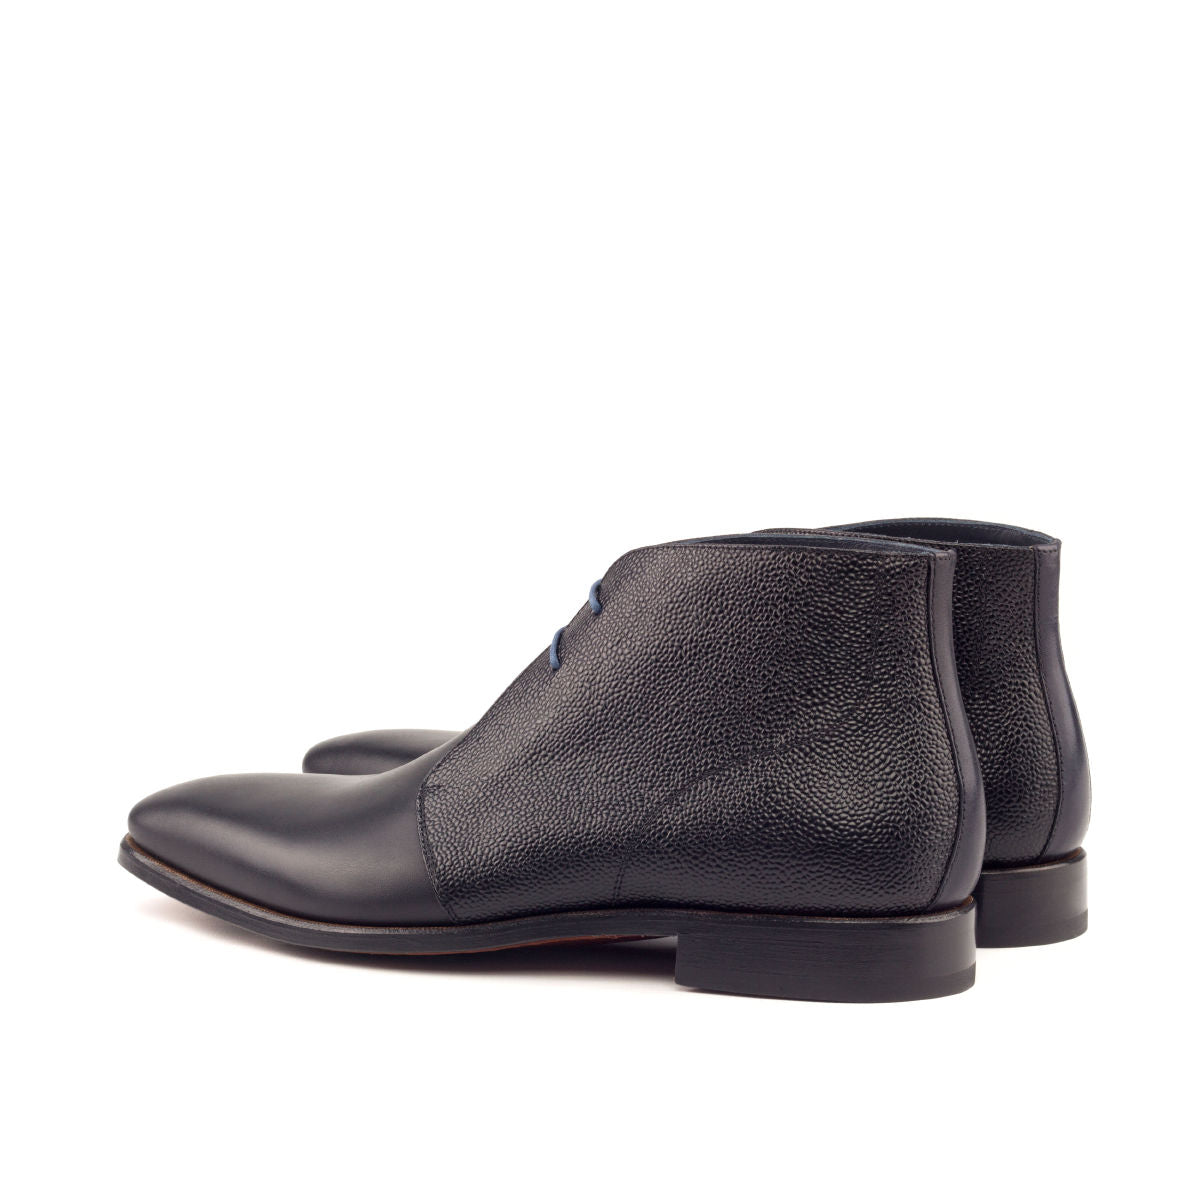 SUITCAFE Pebble Grain Men's Chukka Boot Black and Navy Leather